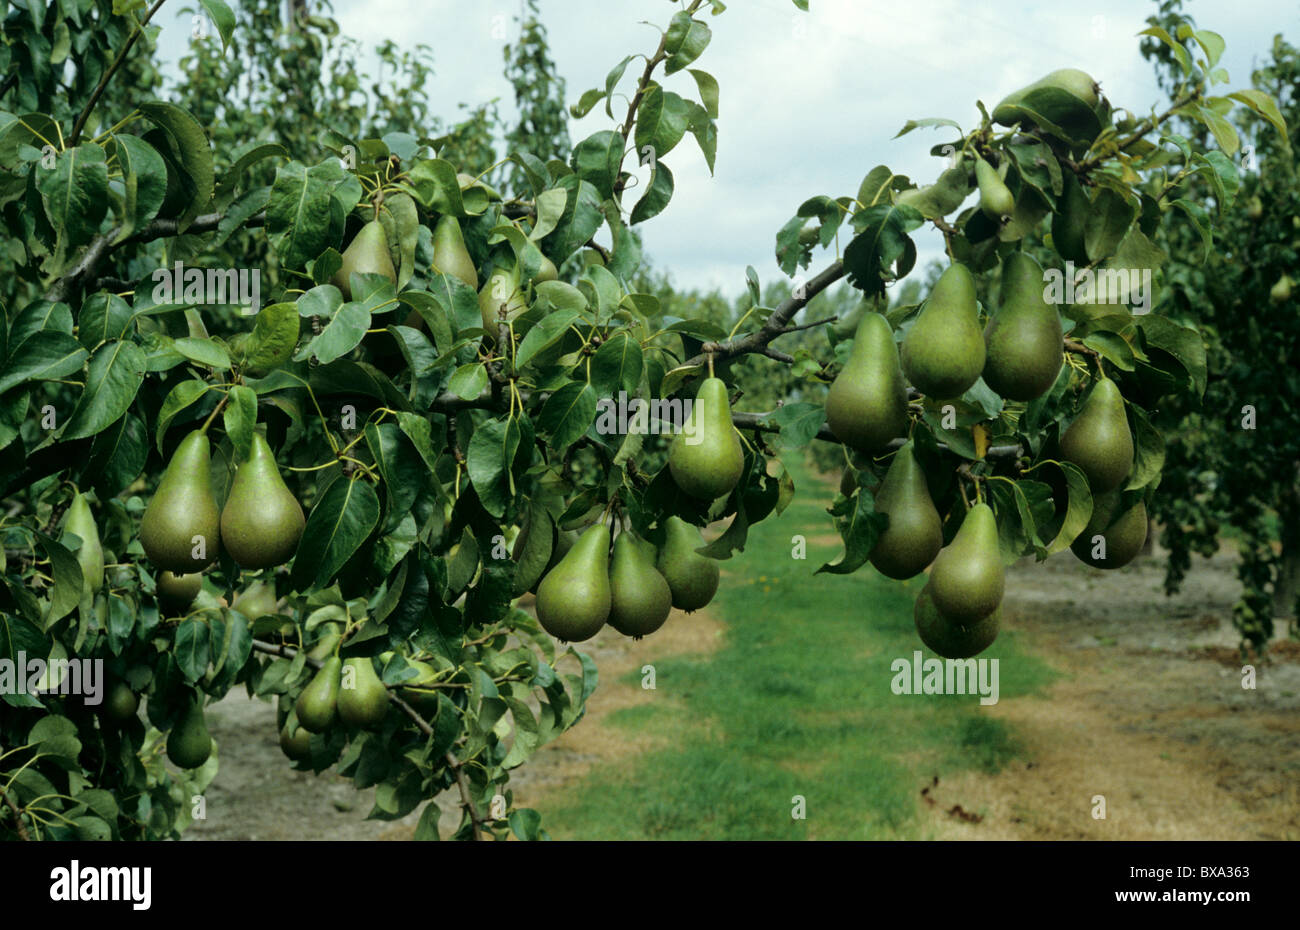 Heavy crop of ripe pears variety Conference on the tree Stock Photo